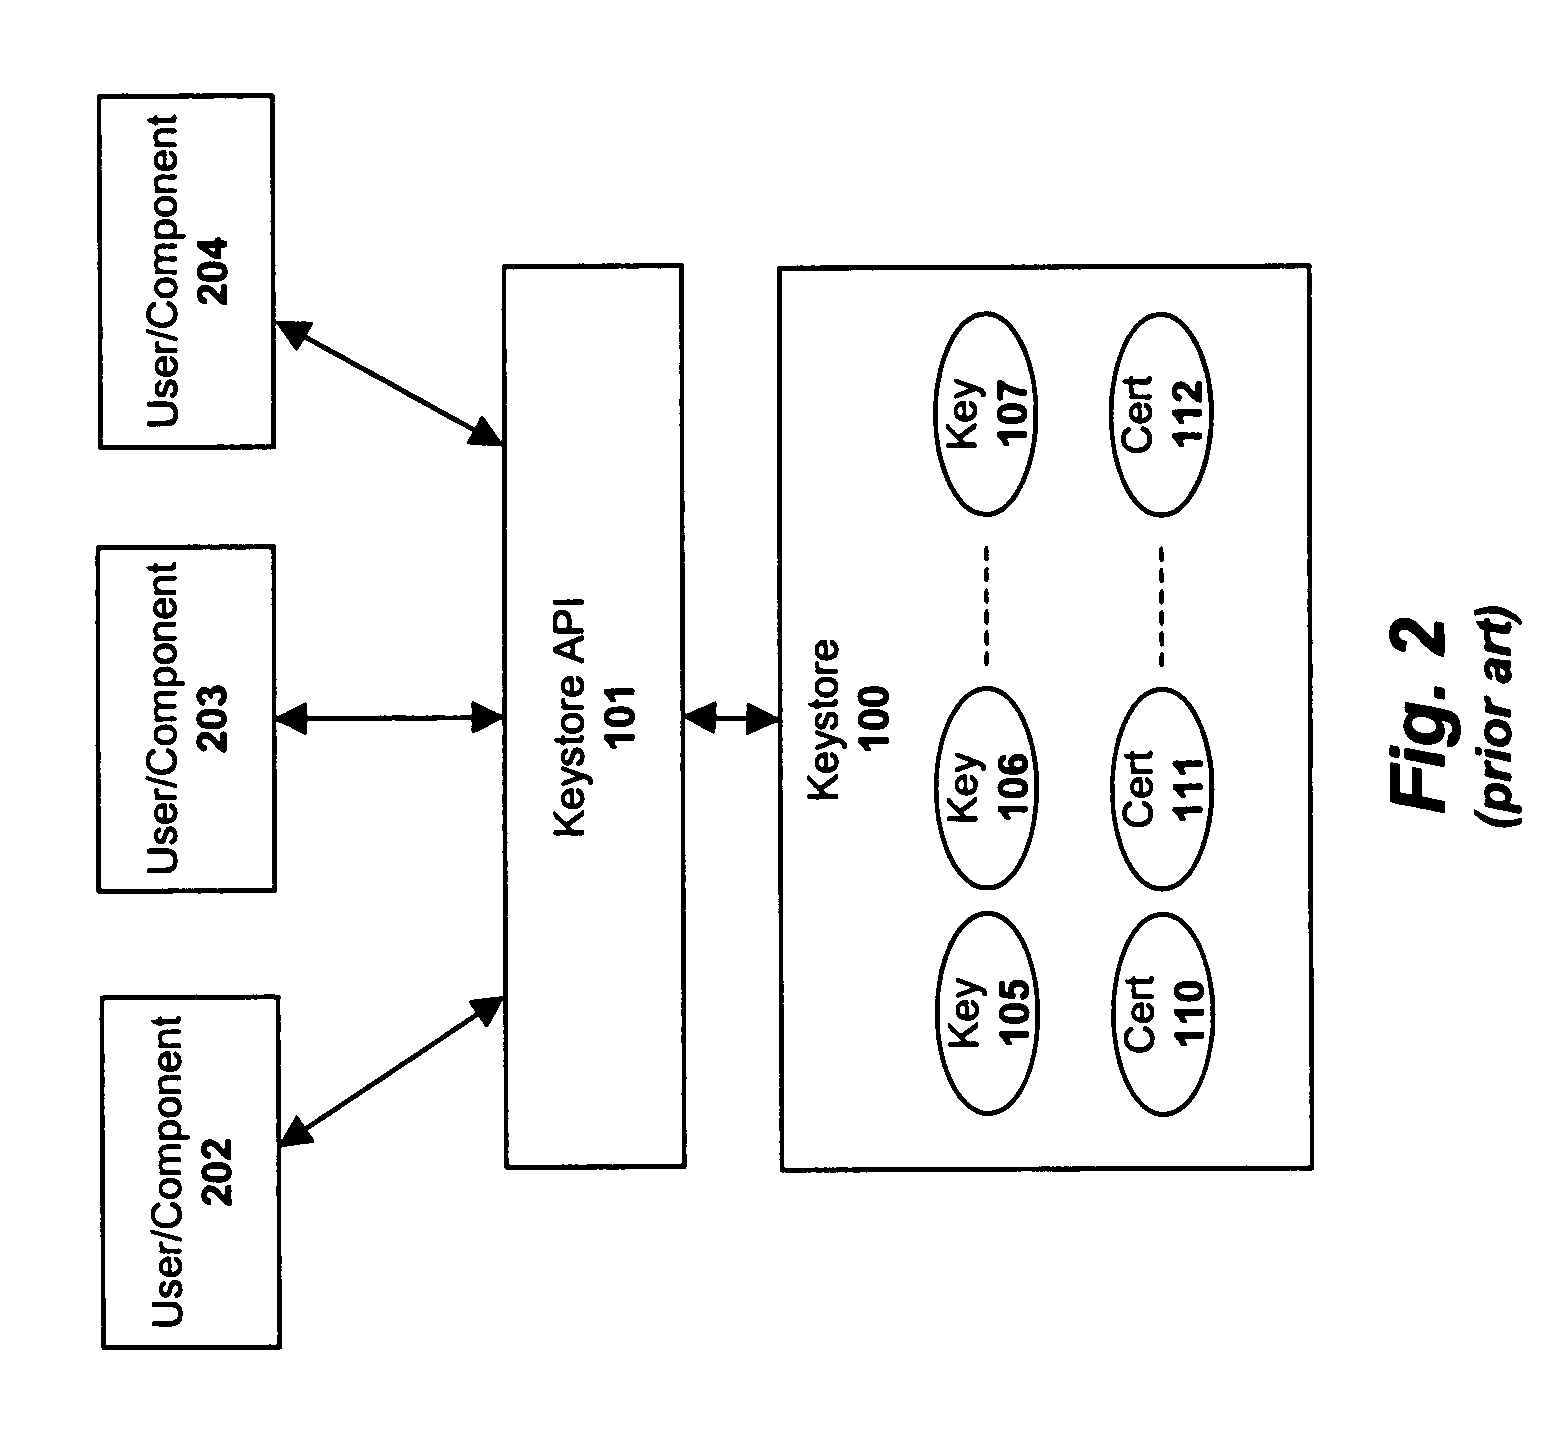 System and method for implementing a distributed keystore within an enterprise network